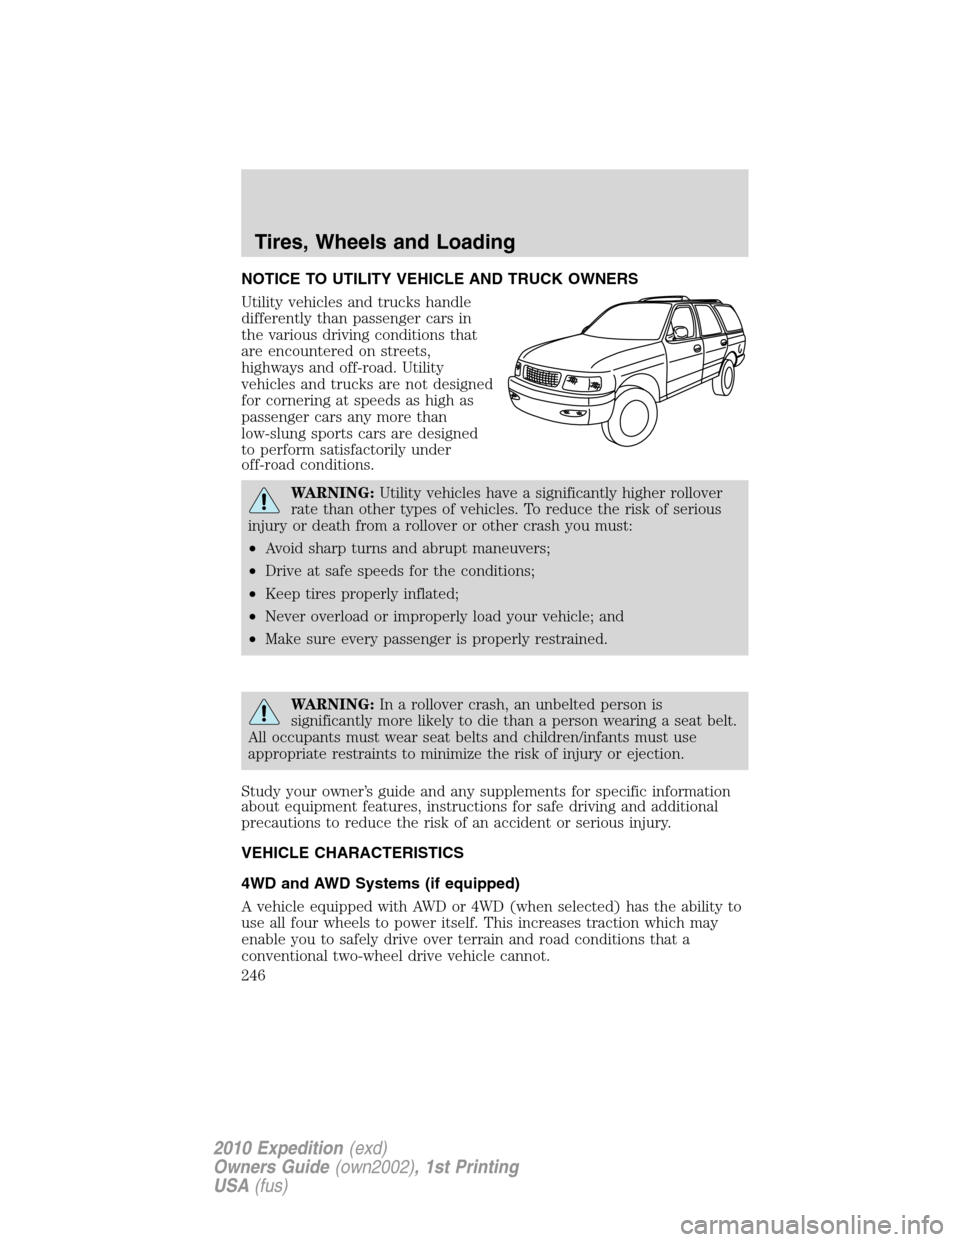 FORD EXPEDITION 2010 3.G Owners Manual NOTICE TO UTILITY VEHICLE AND TRUCK OWNERS
Utility vehicles and trucks handle
differently than passenger cars in
the various driving conditions that
are encountered on streets,
highways and off-road. 